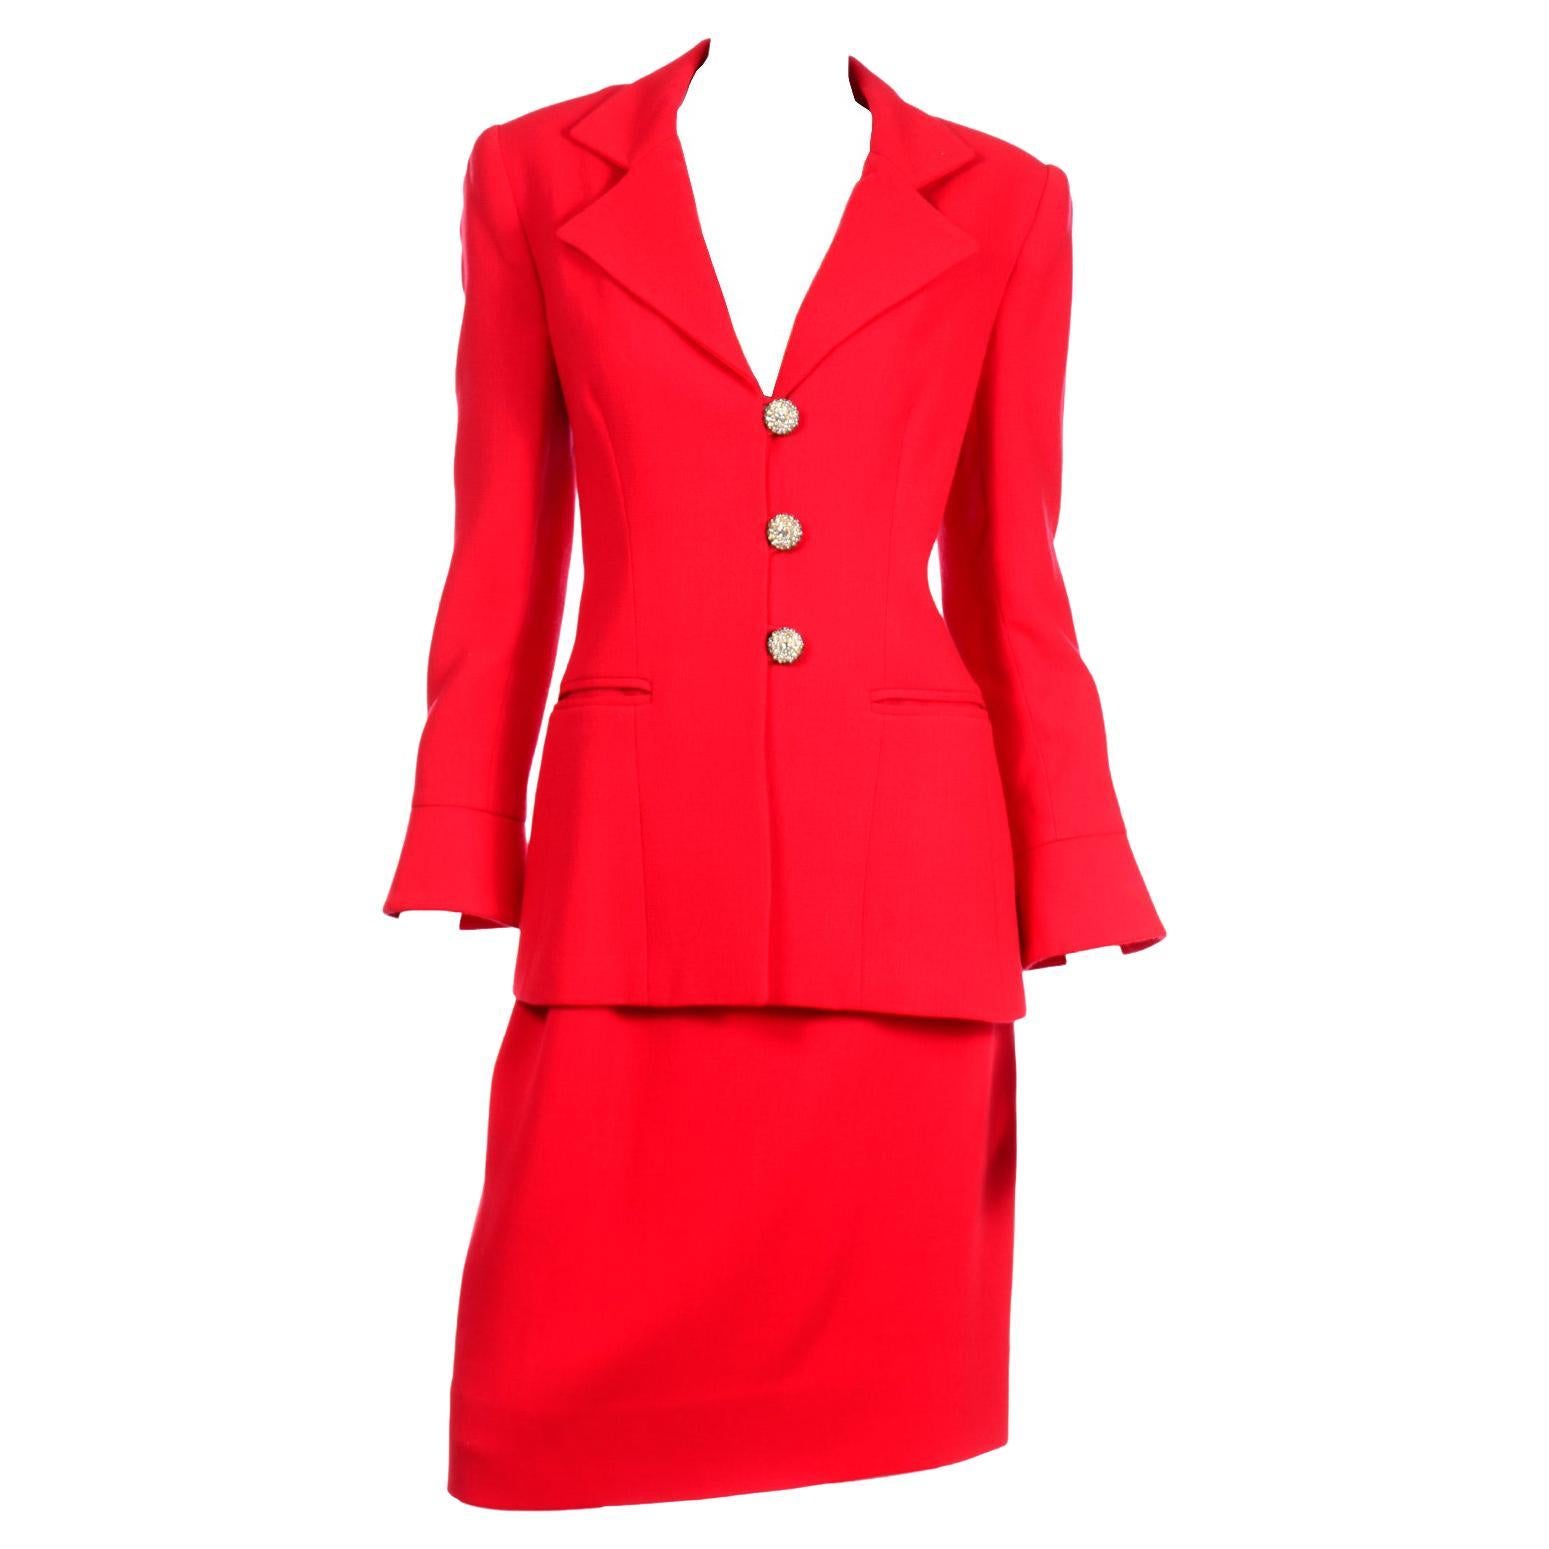 David Hayes Tomato Red Jacket & Skirt Suit w Rhinestone Buttons & Flared Sleeves For Sale